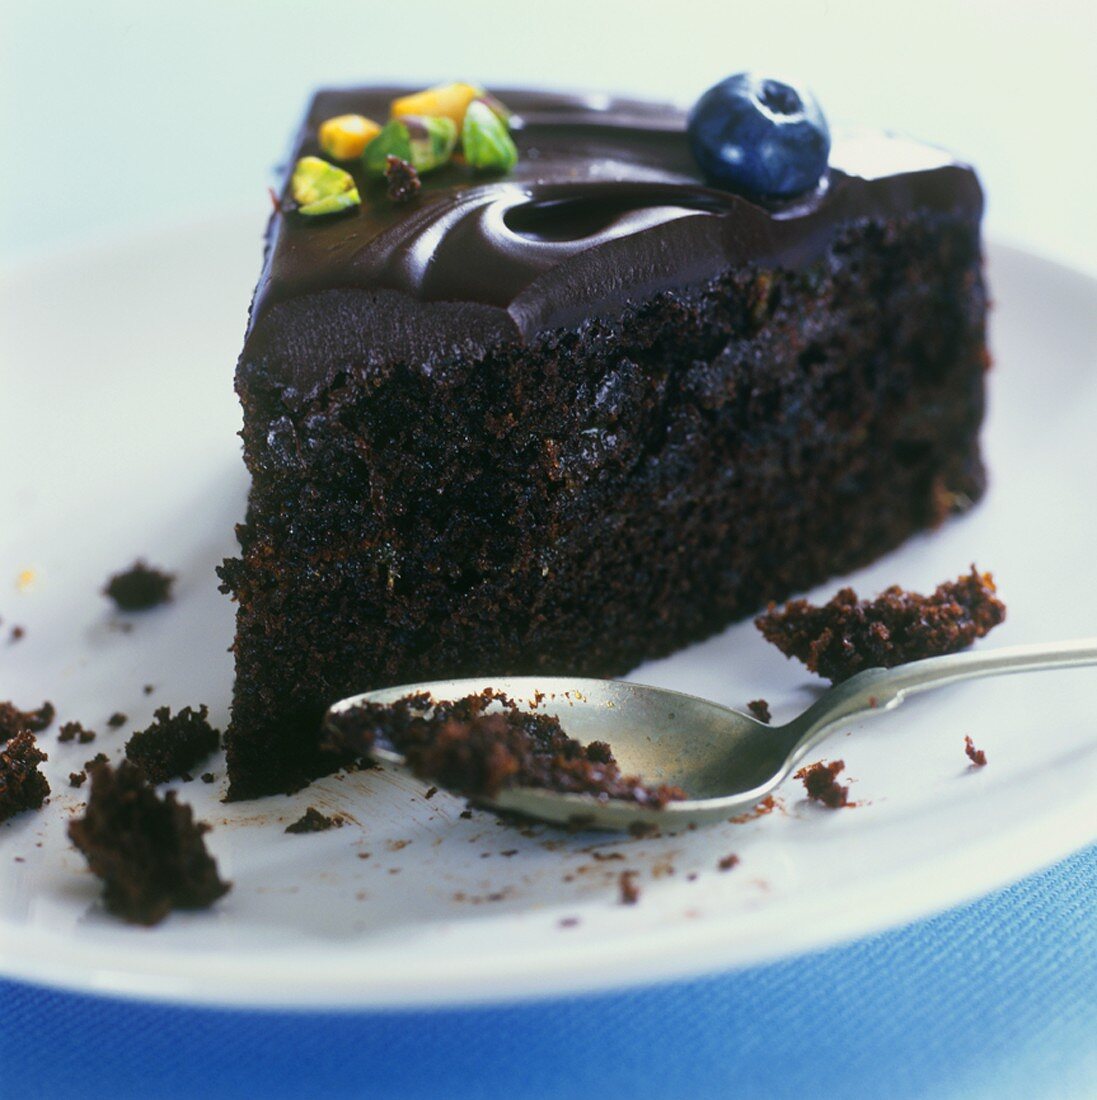 A piece of chocolate cake with chocolate icing